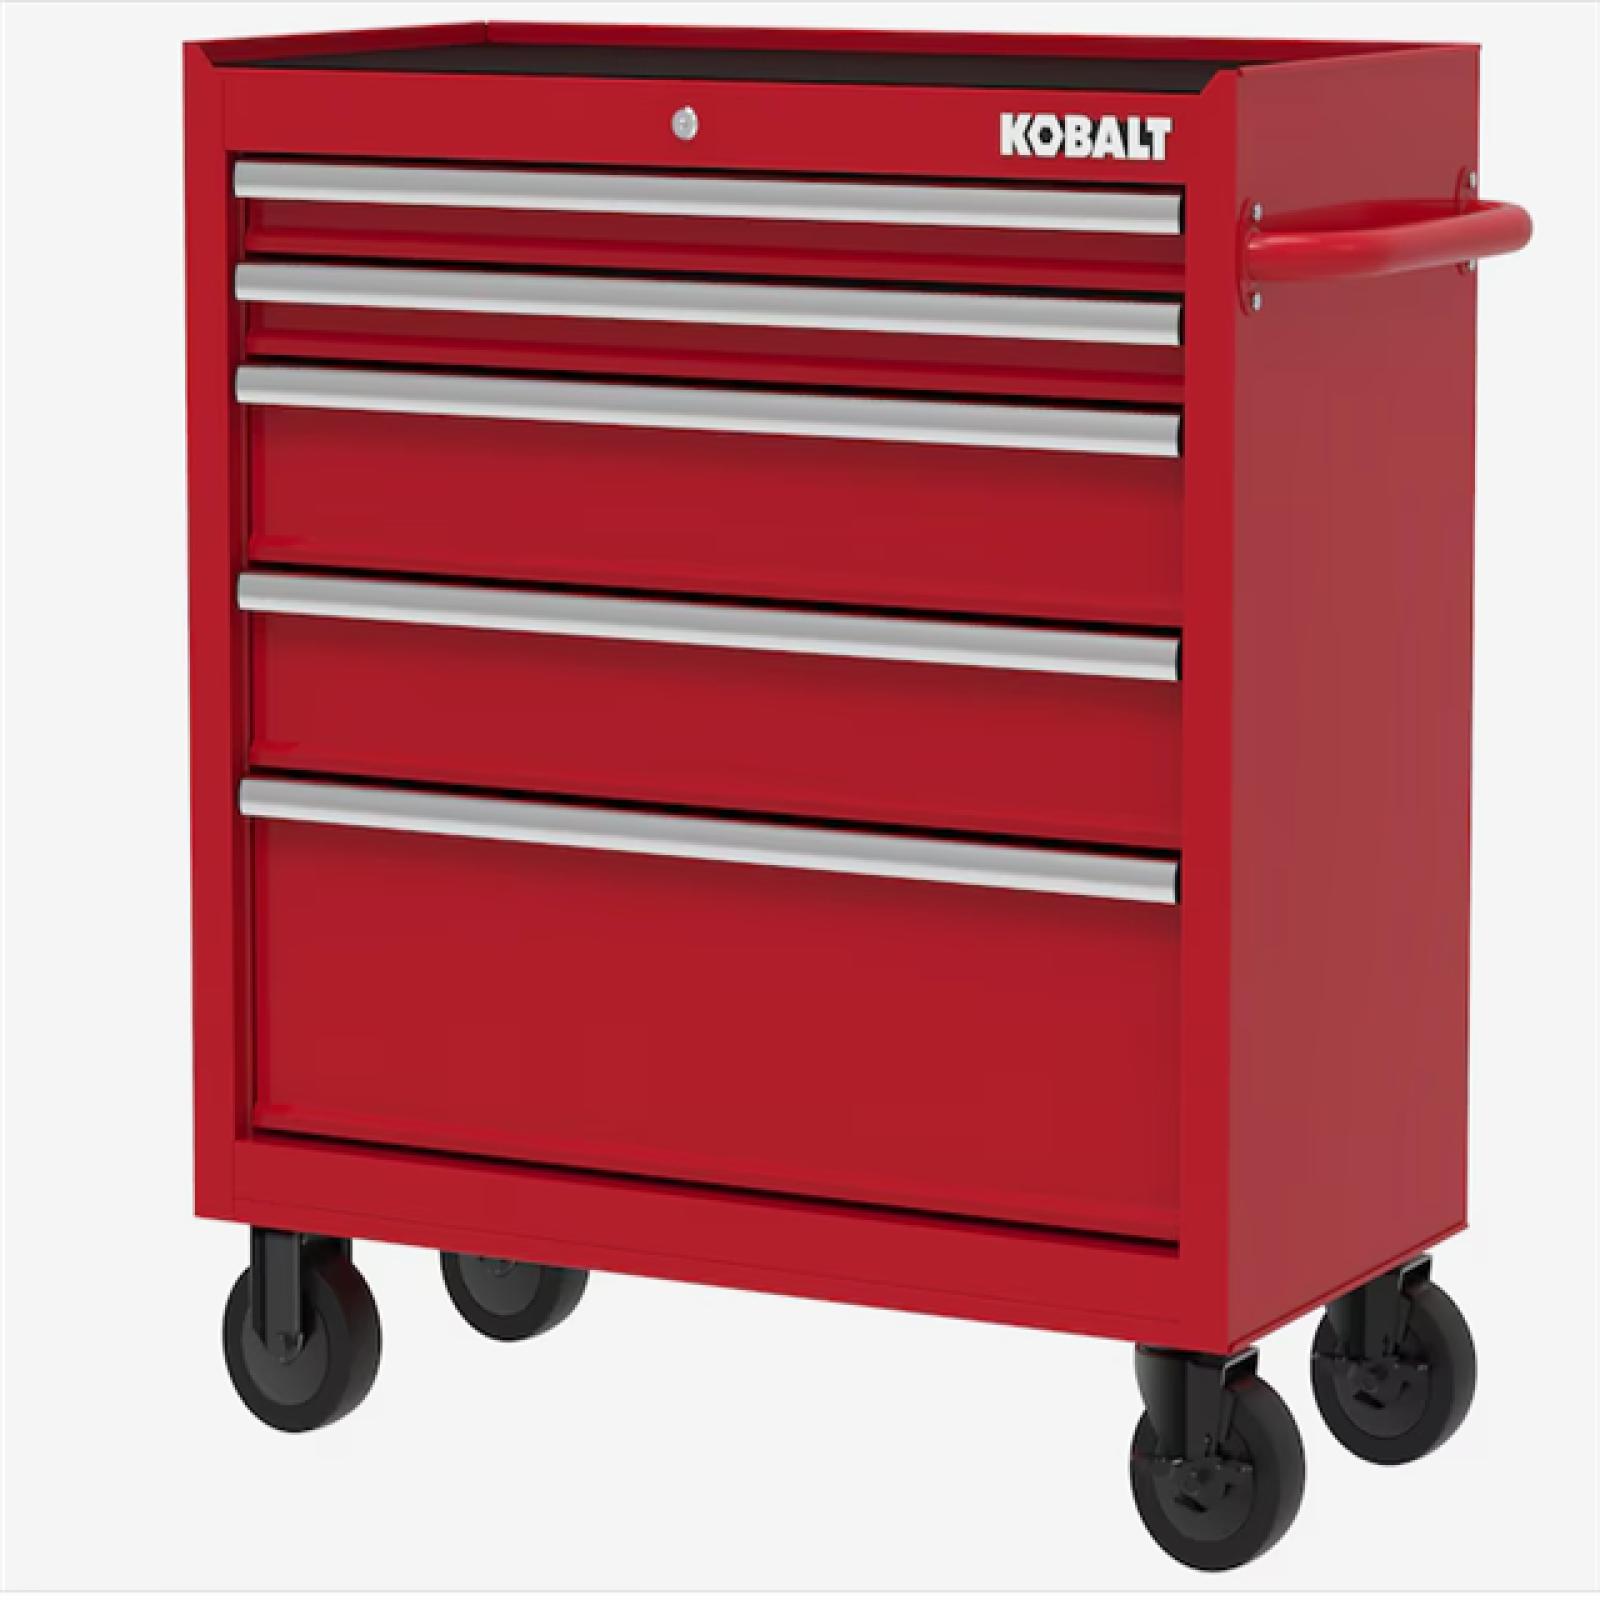 DALLAS LOCATION - Kobalt 36-in W x 38-in H 5-Drawer Steel Rolling Tool Cabinet (Red) PALLET - (3 UNITS)